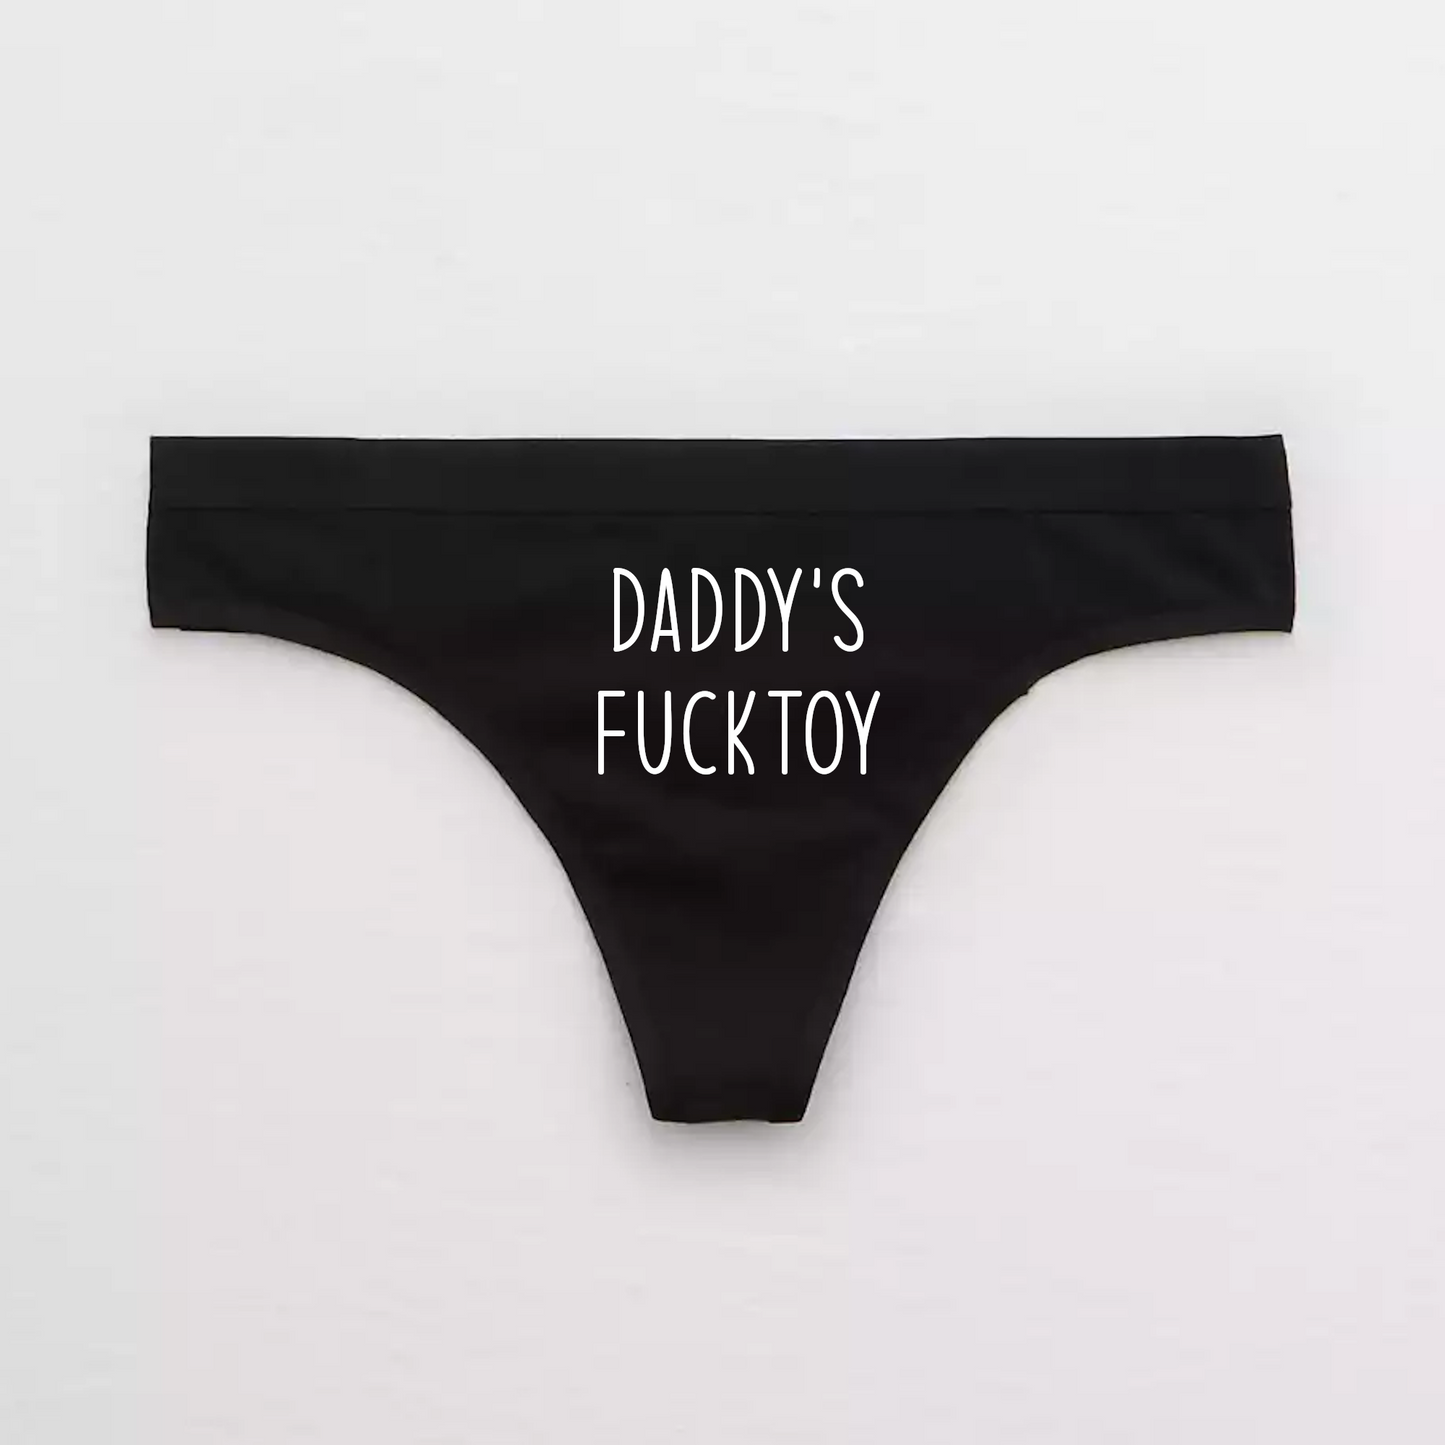 Daddys Fucktoy Naughty Panties for DDLG Kink